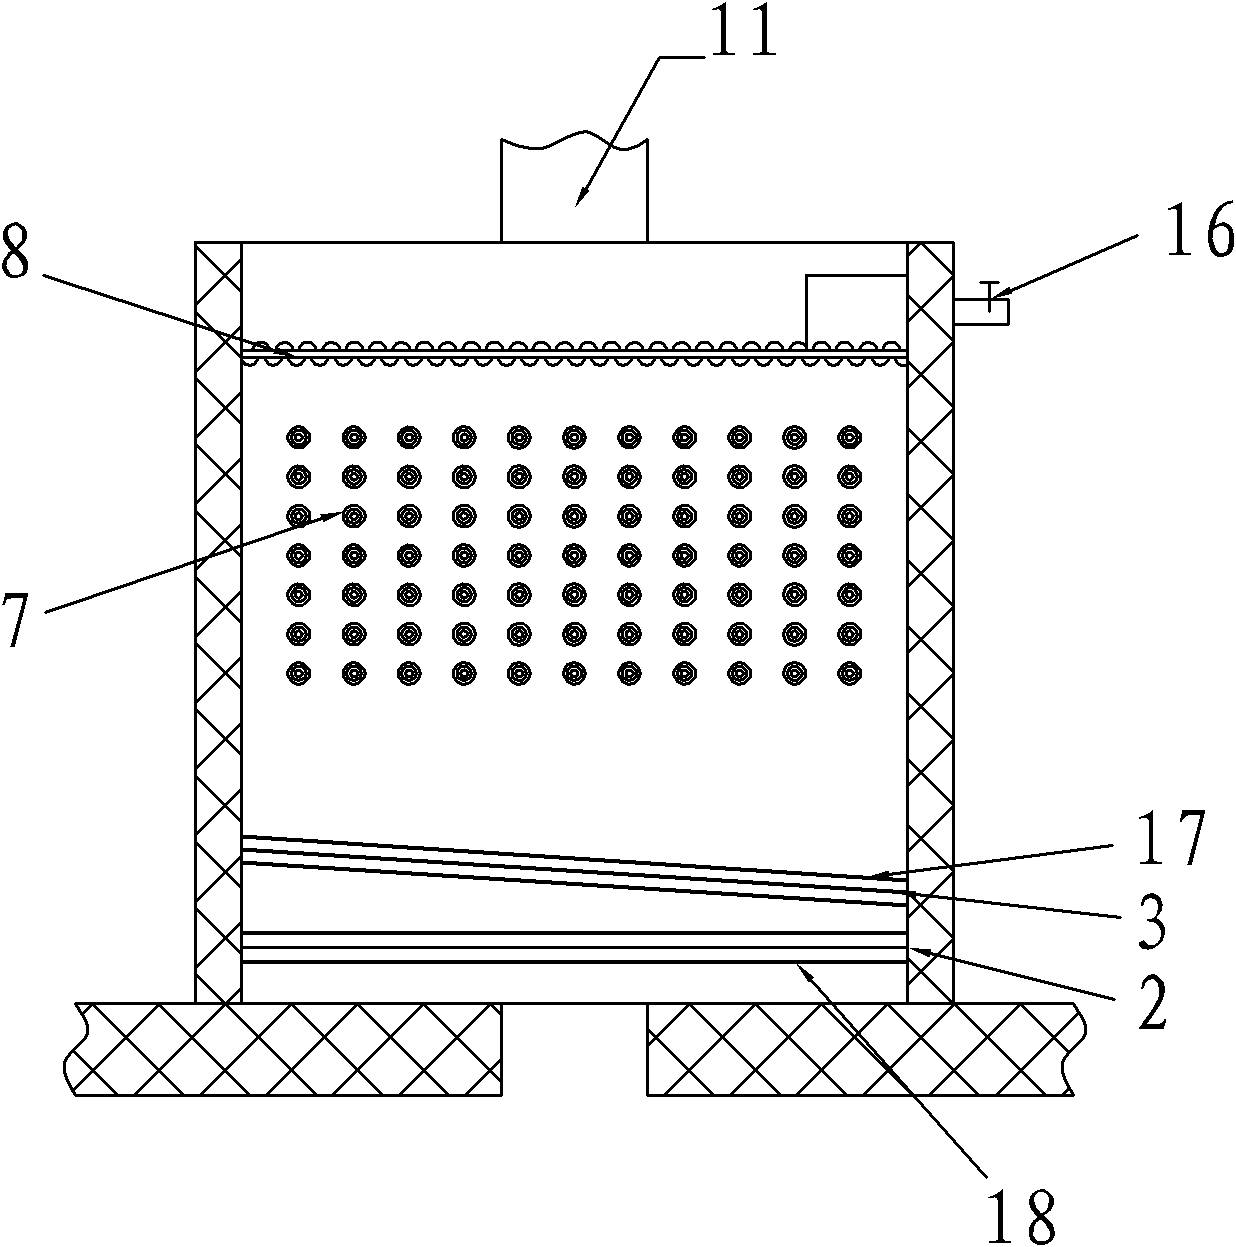 Accumulated-oil-removing energy-saving device